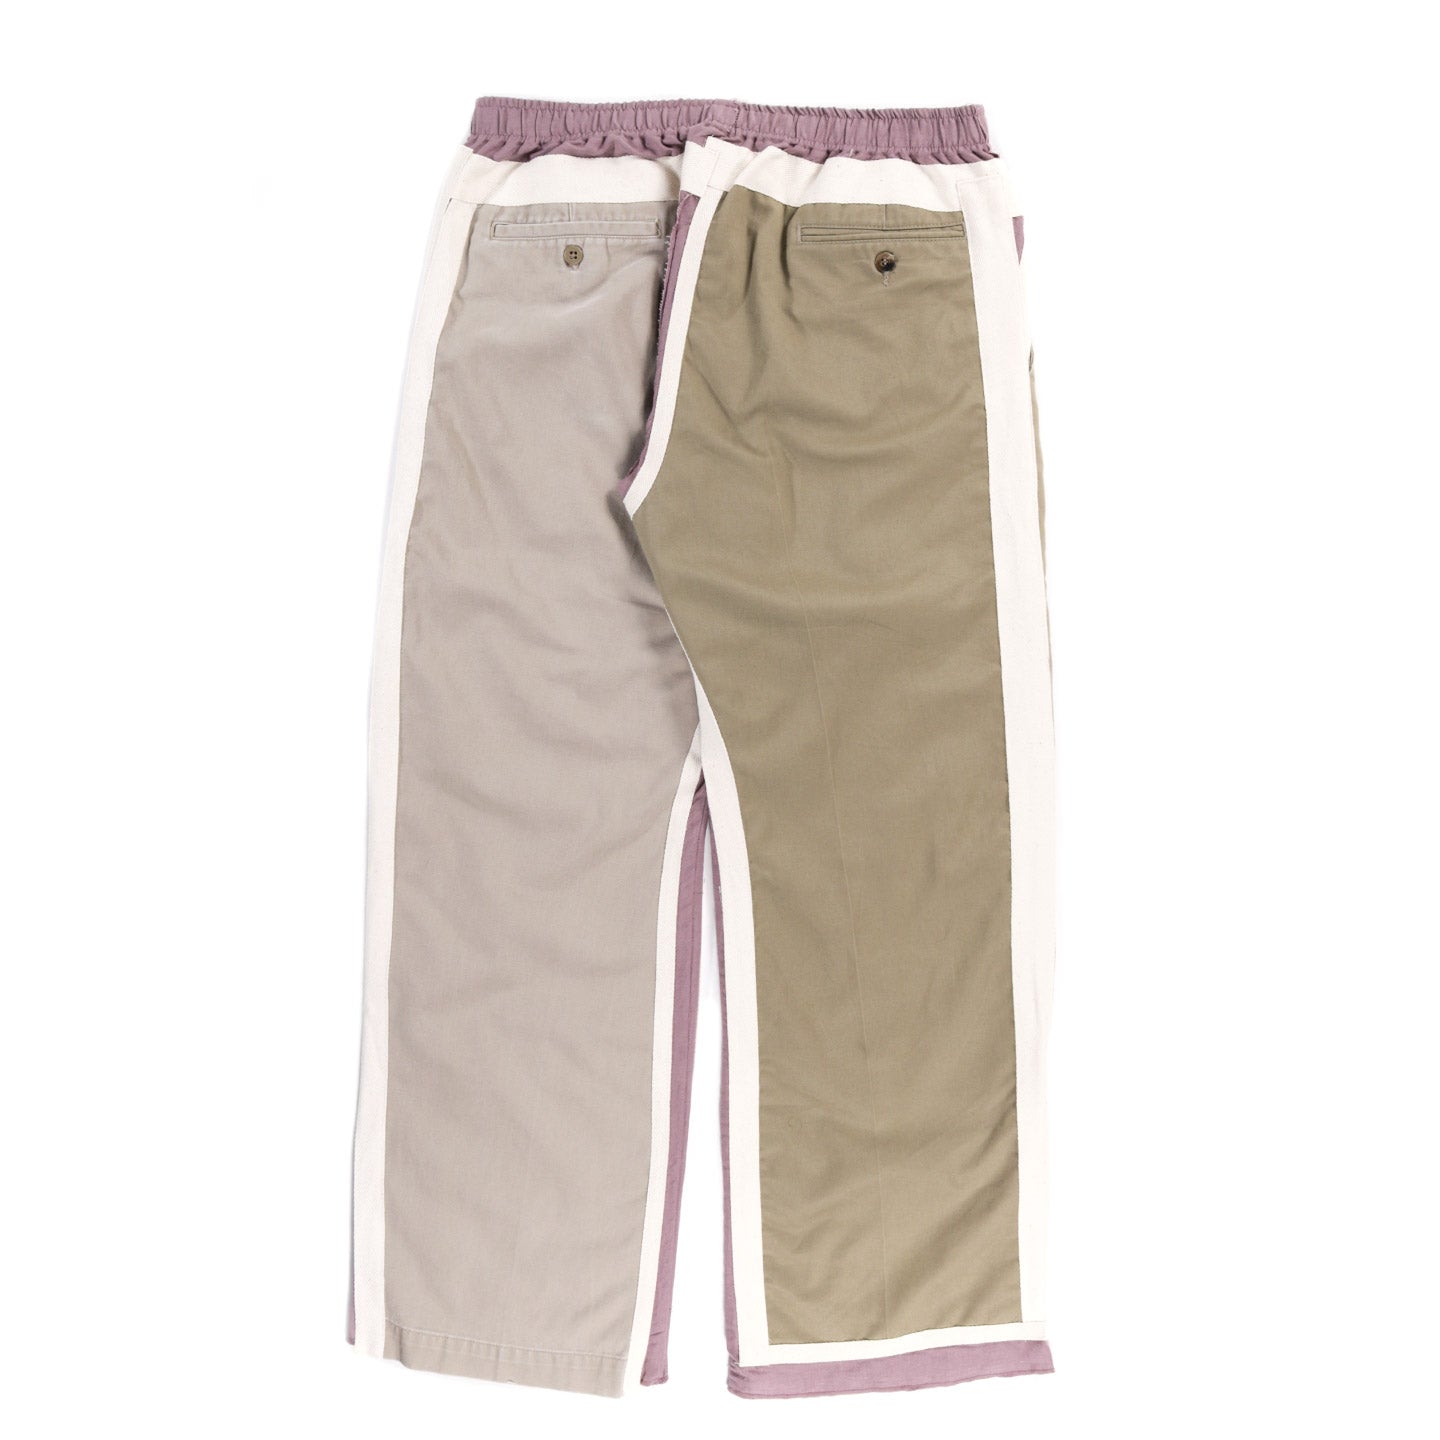 REBUILD BY NEEDLES CHINO COVERED PANT SALMON - M (B)